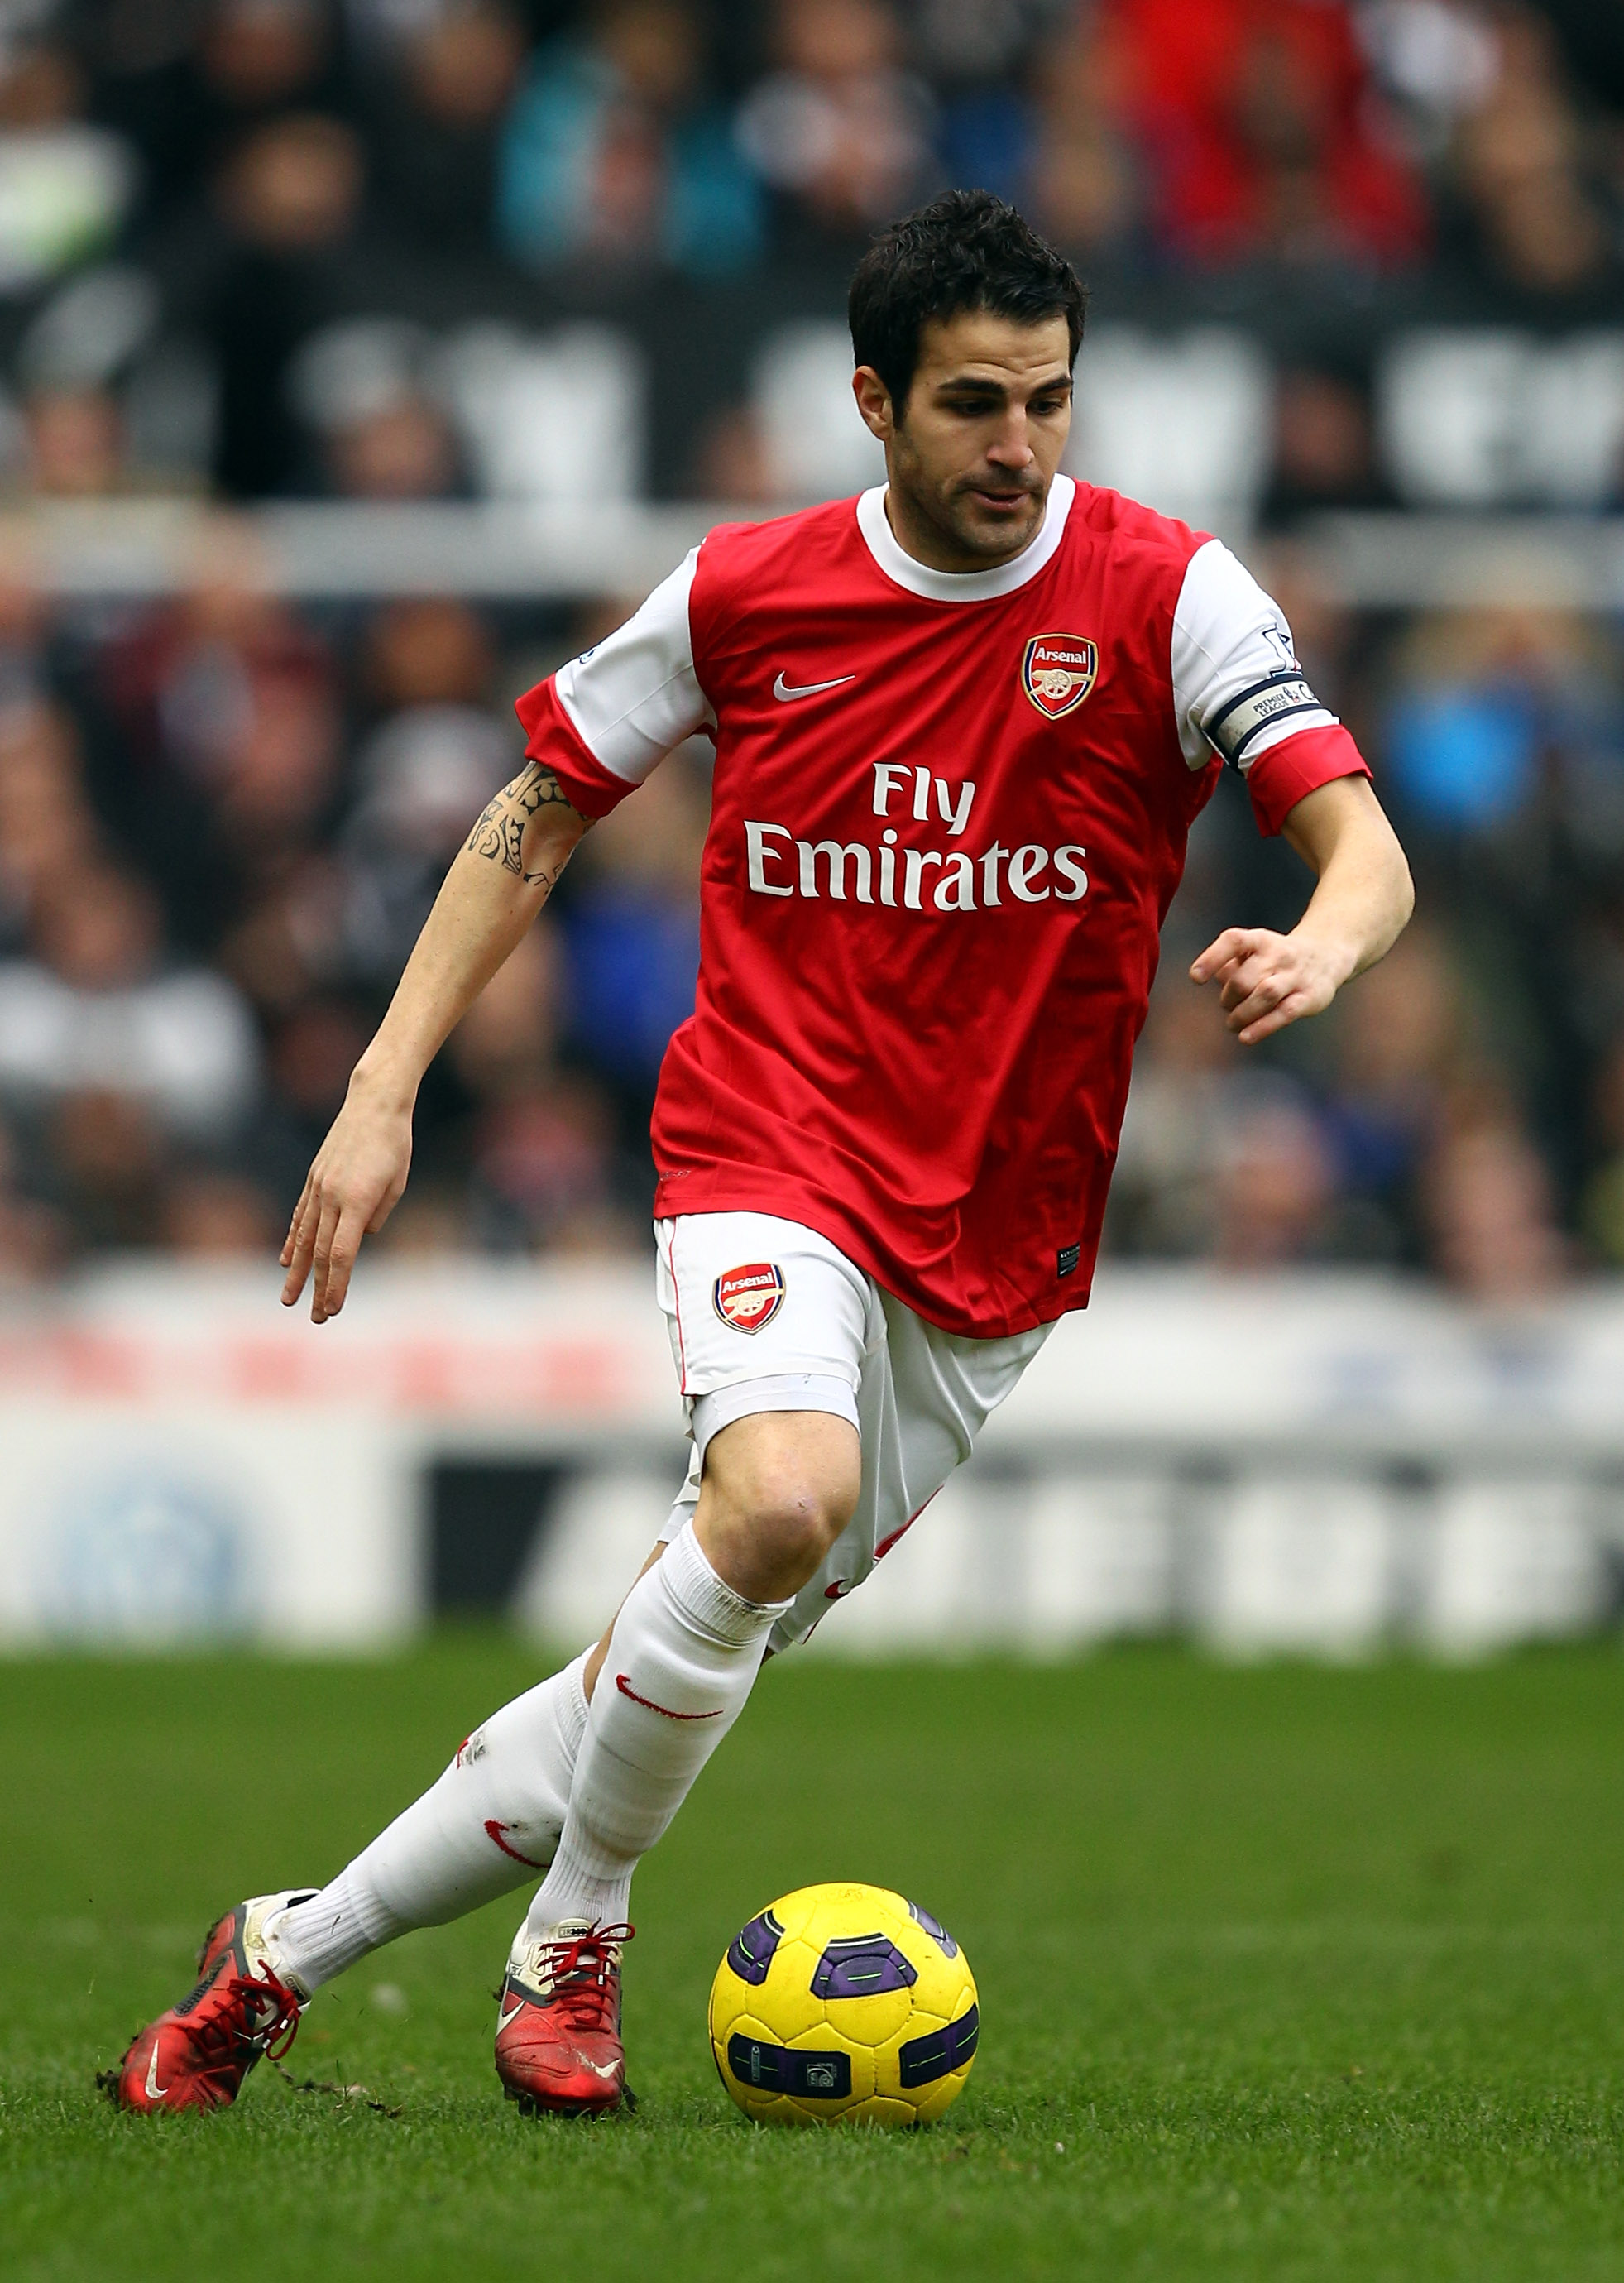 NEWCASTLE UPON TYNE, ENGLAND - FEBRUARY 05:  Cesc Fabregas of Arsenal in action during the Barclays Premier League match between Newcastle United and Arsenal at St James' Park on February 5, 2011 in Newcastle upon Tyne, England.  (Photo by Richard Heathco